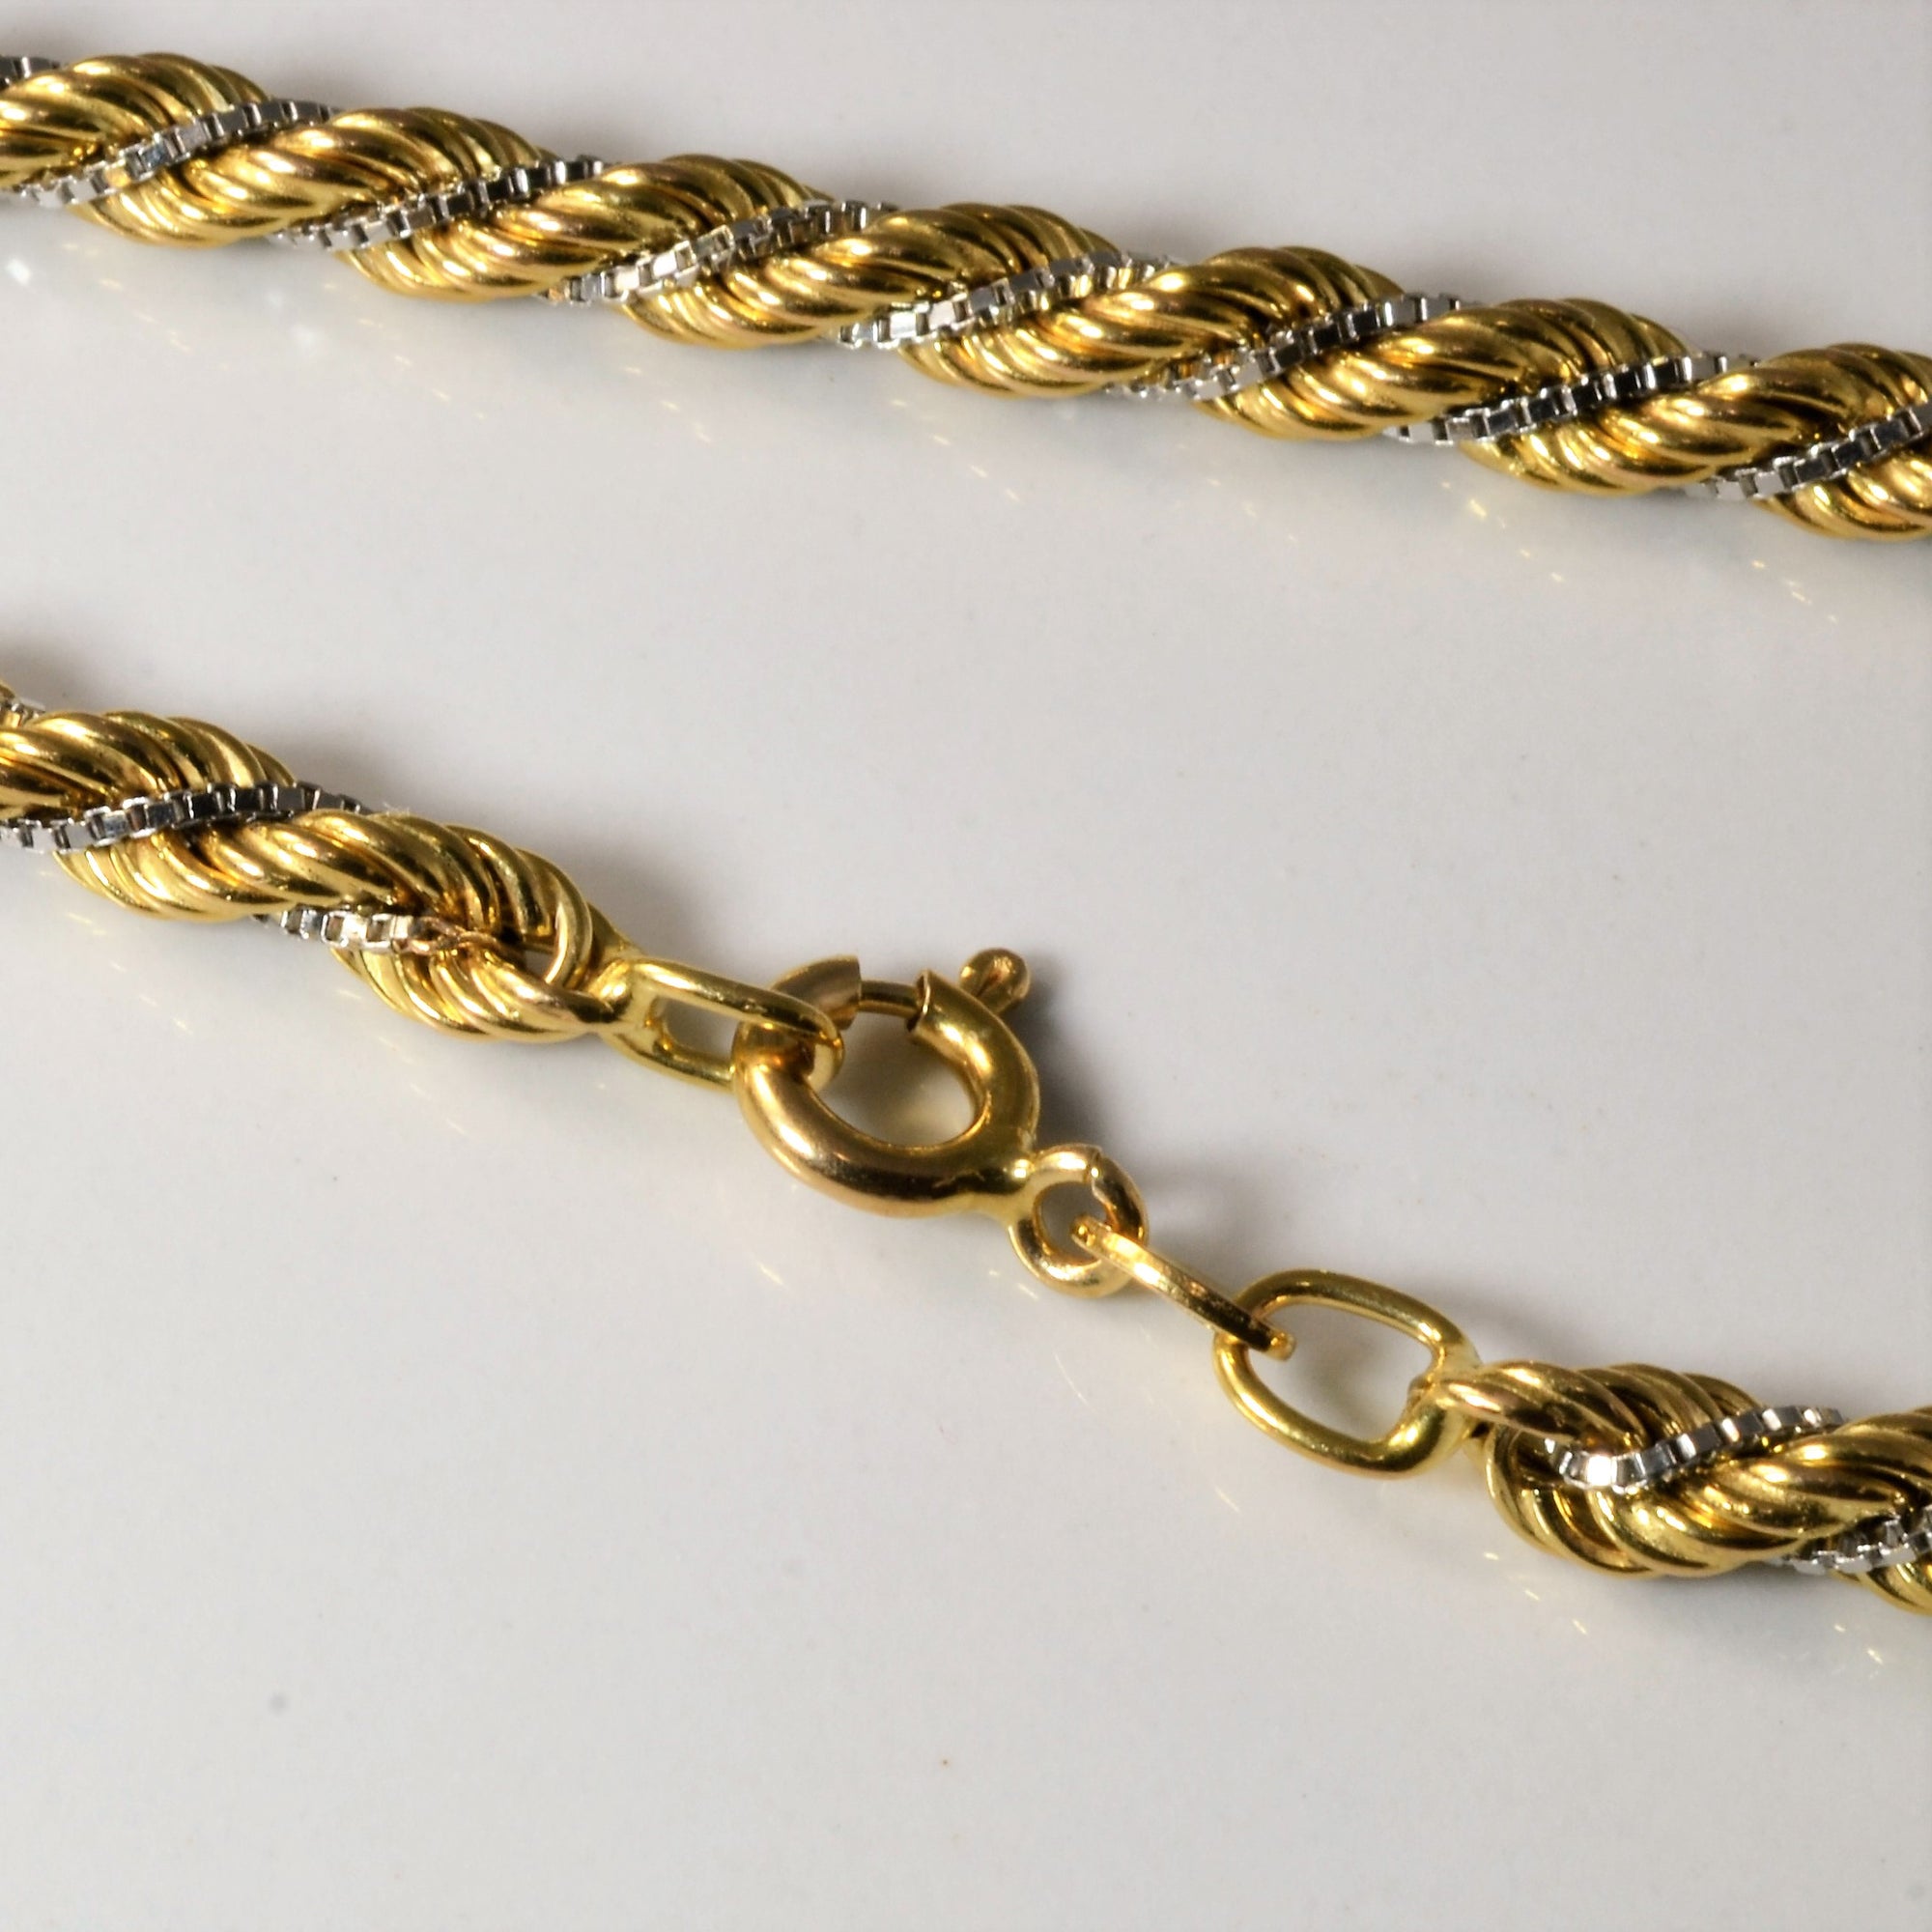 Two Tone Gold Rope Chain Bracelet | 8